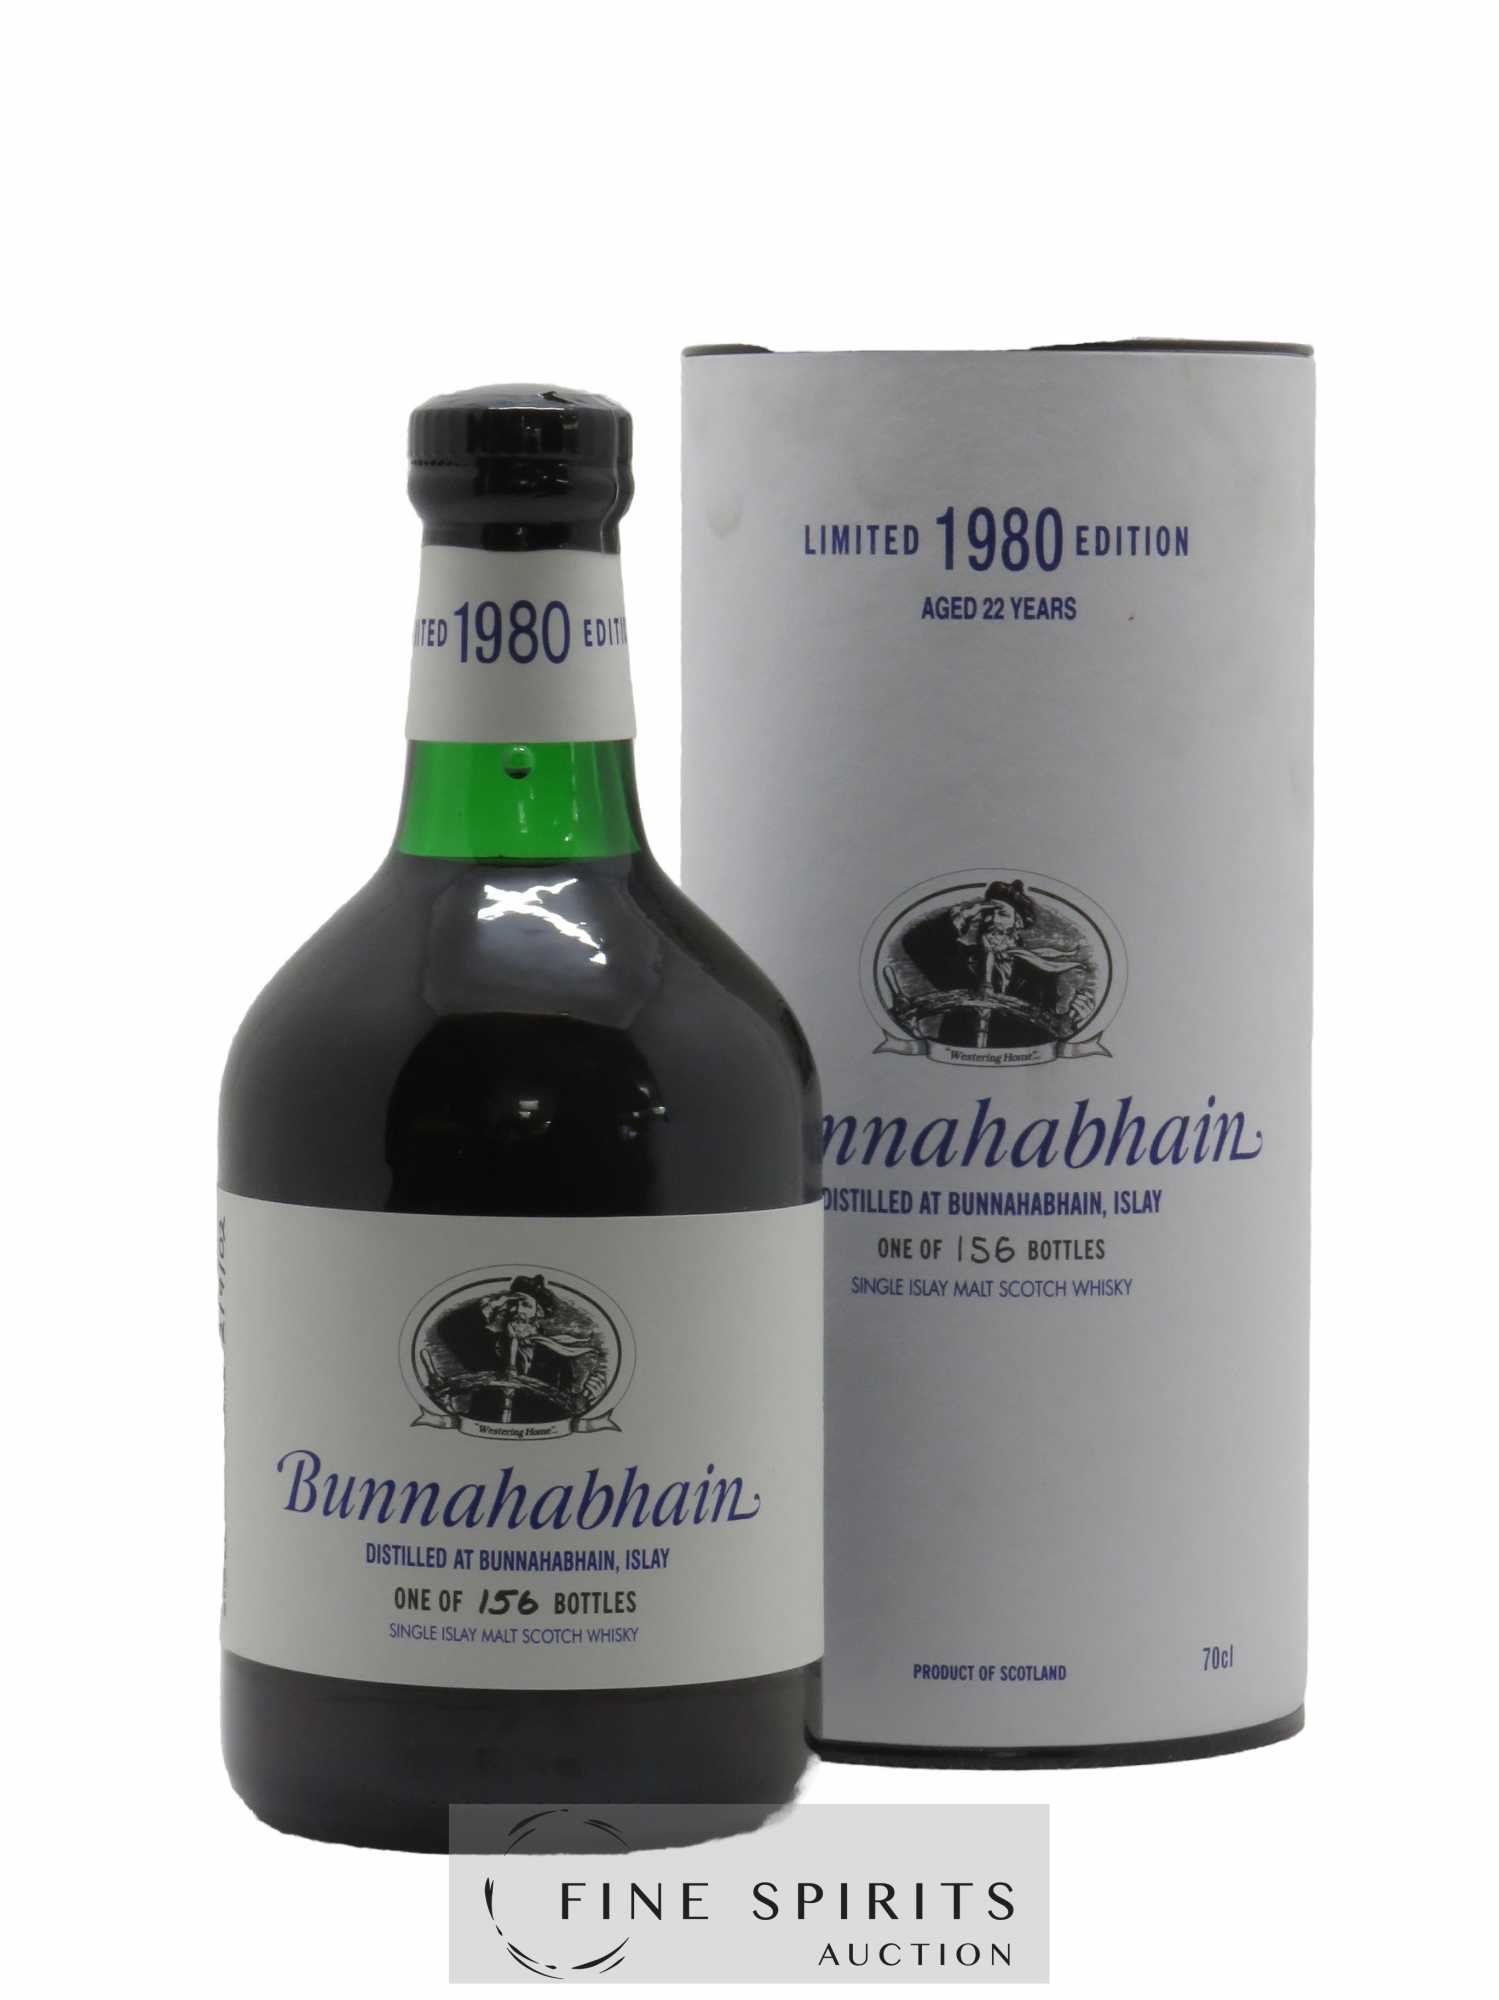 Bunnahabhain 22 years 1980 Of. Cask n°5684 - One of 156 bottles - bottled 2002 Limited Edition